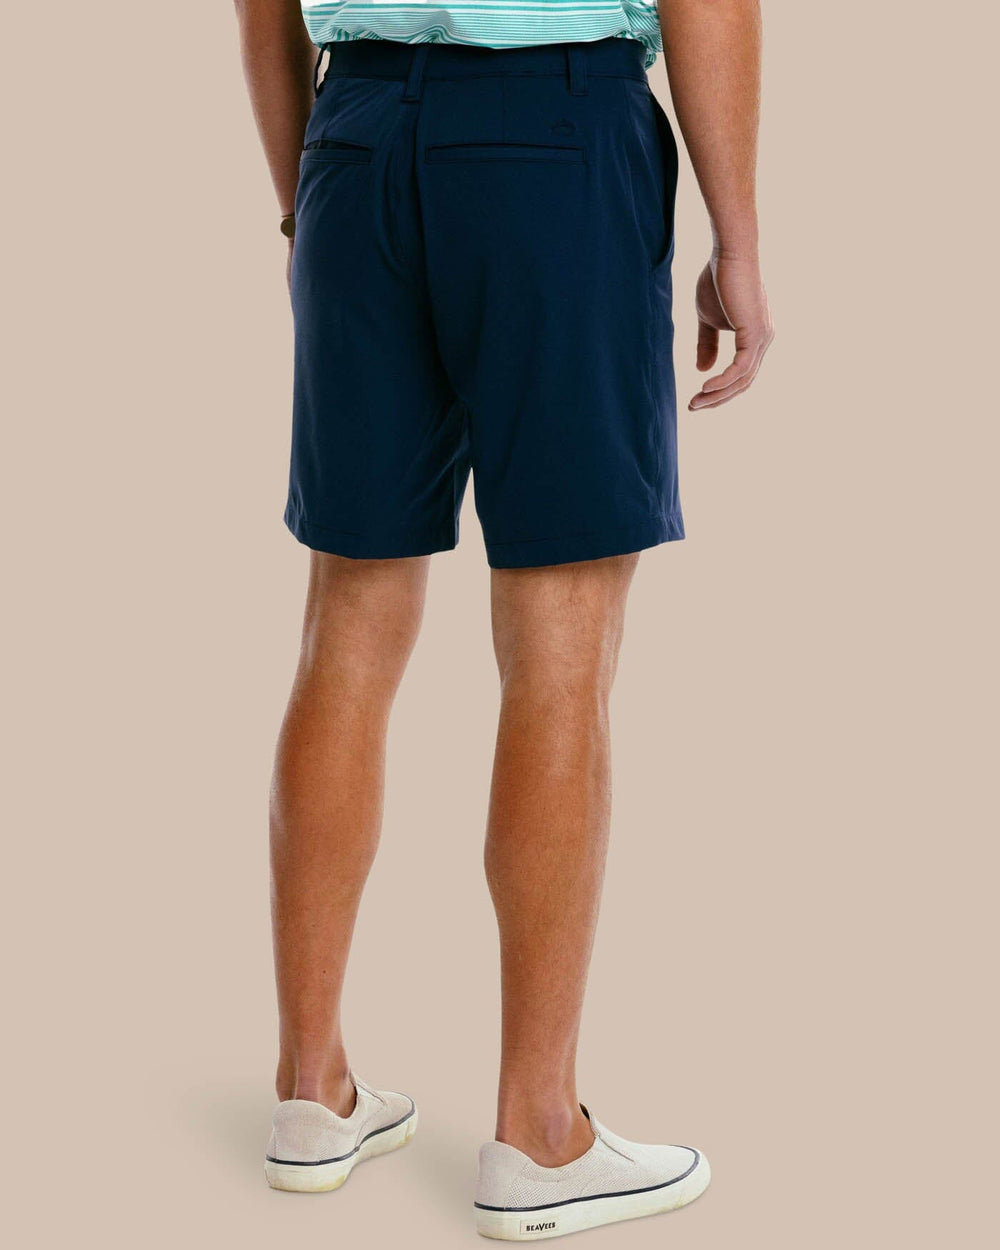 The back of the Men's Gulf 8 Inch Brrr Performance Short by Southern Tide - True Navy